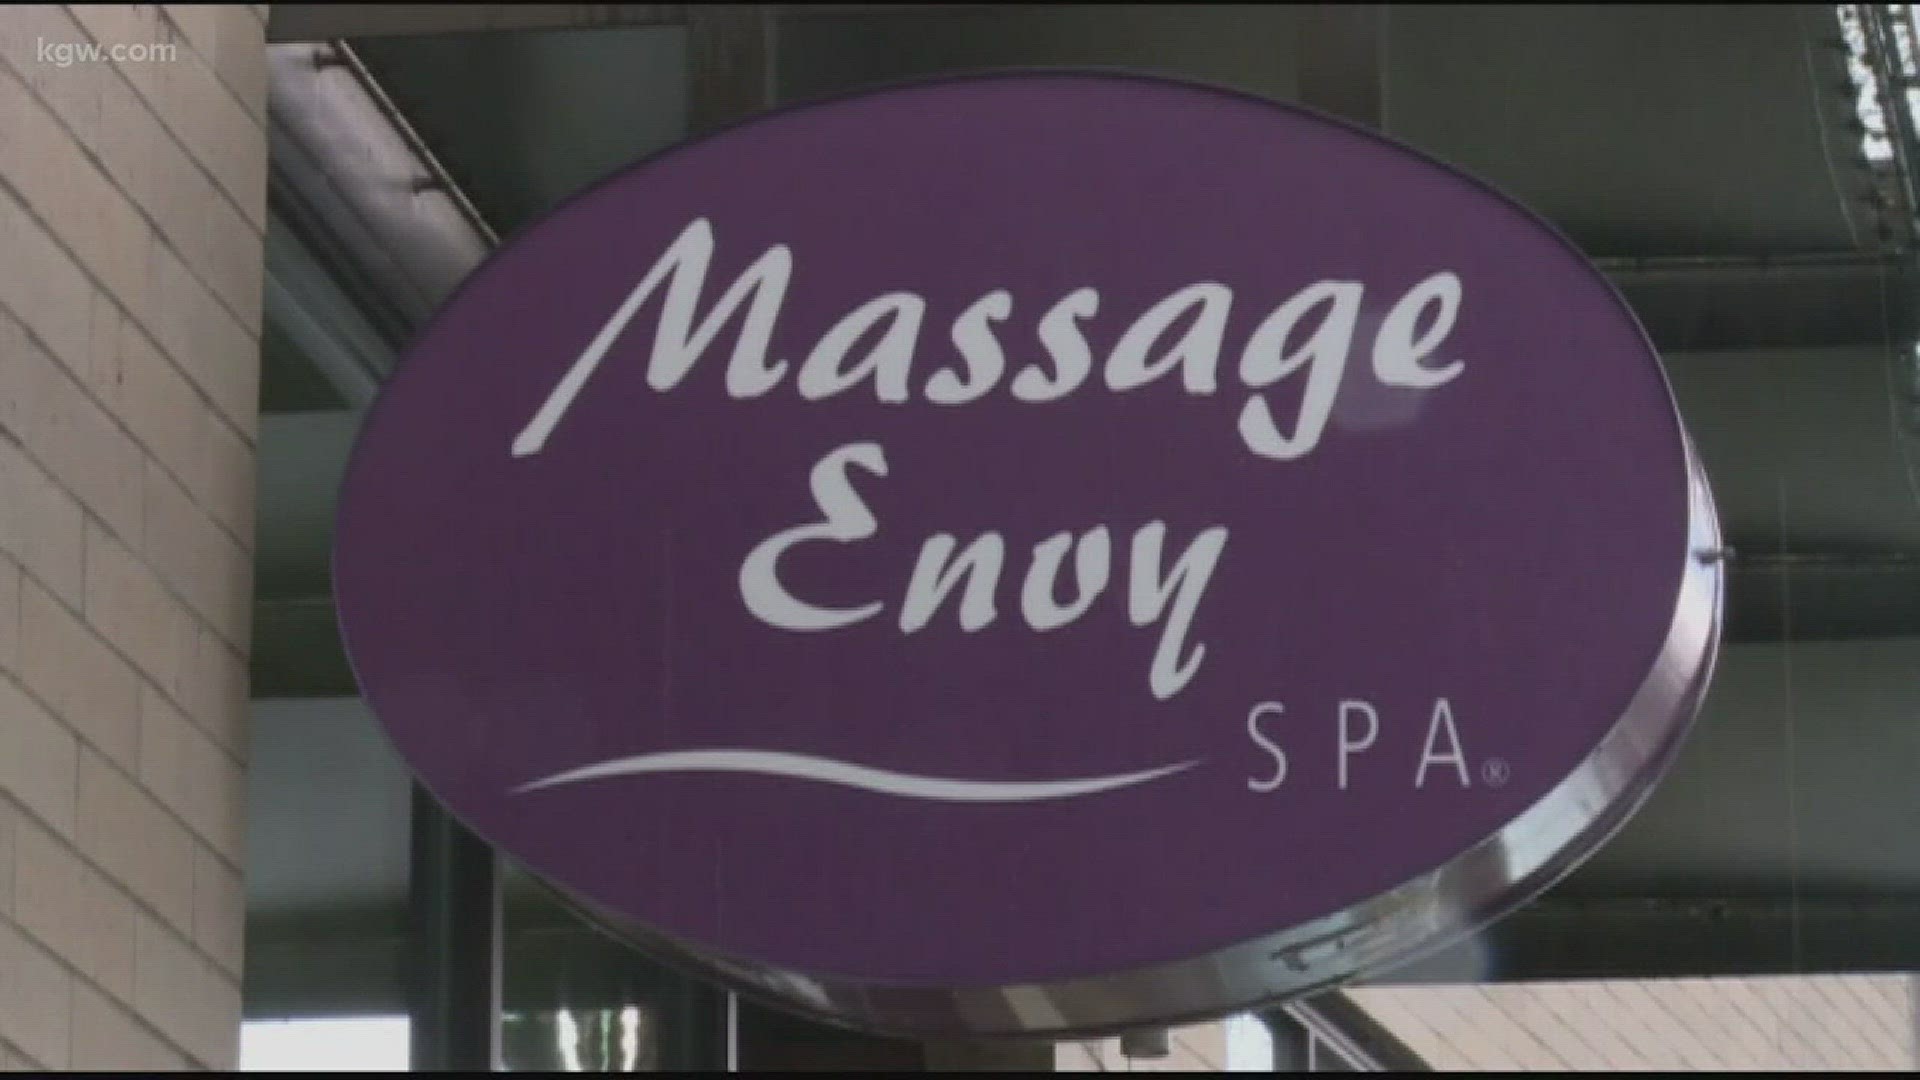 Allegations of abuse at Massage Envy led to licenses being revoked.